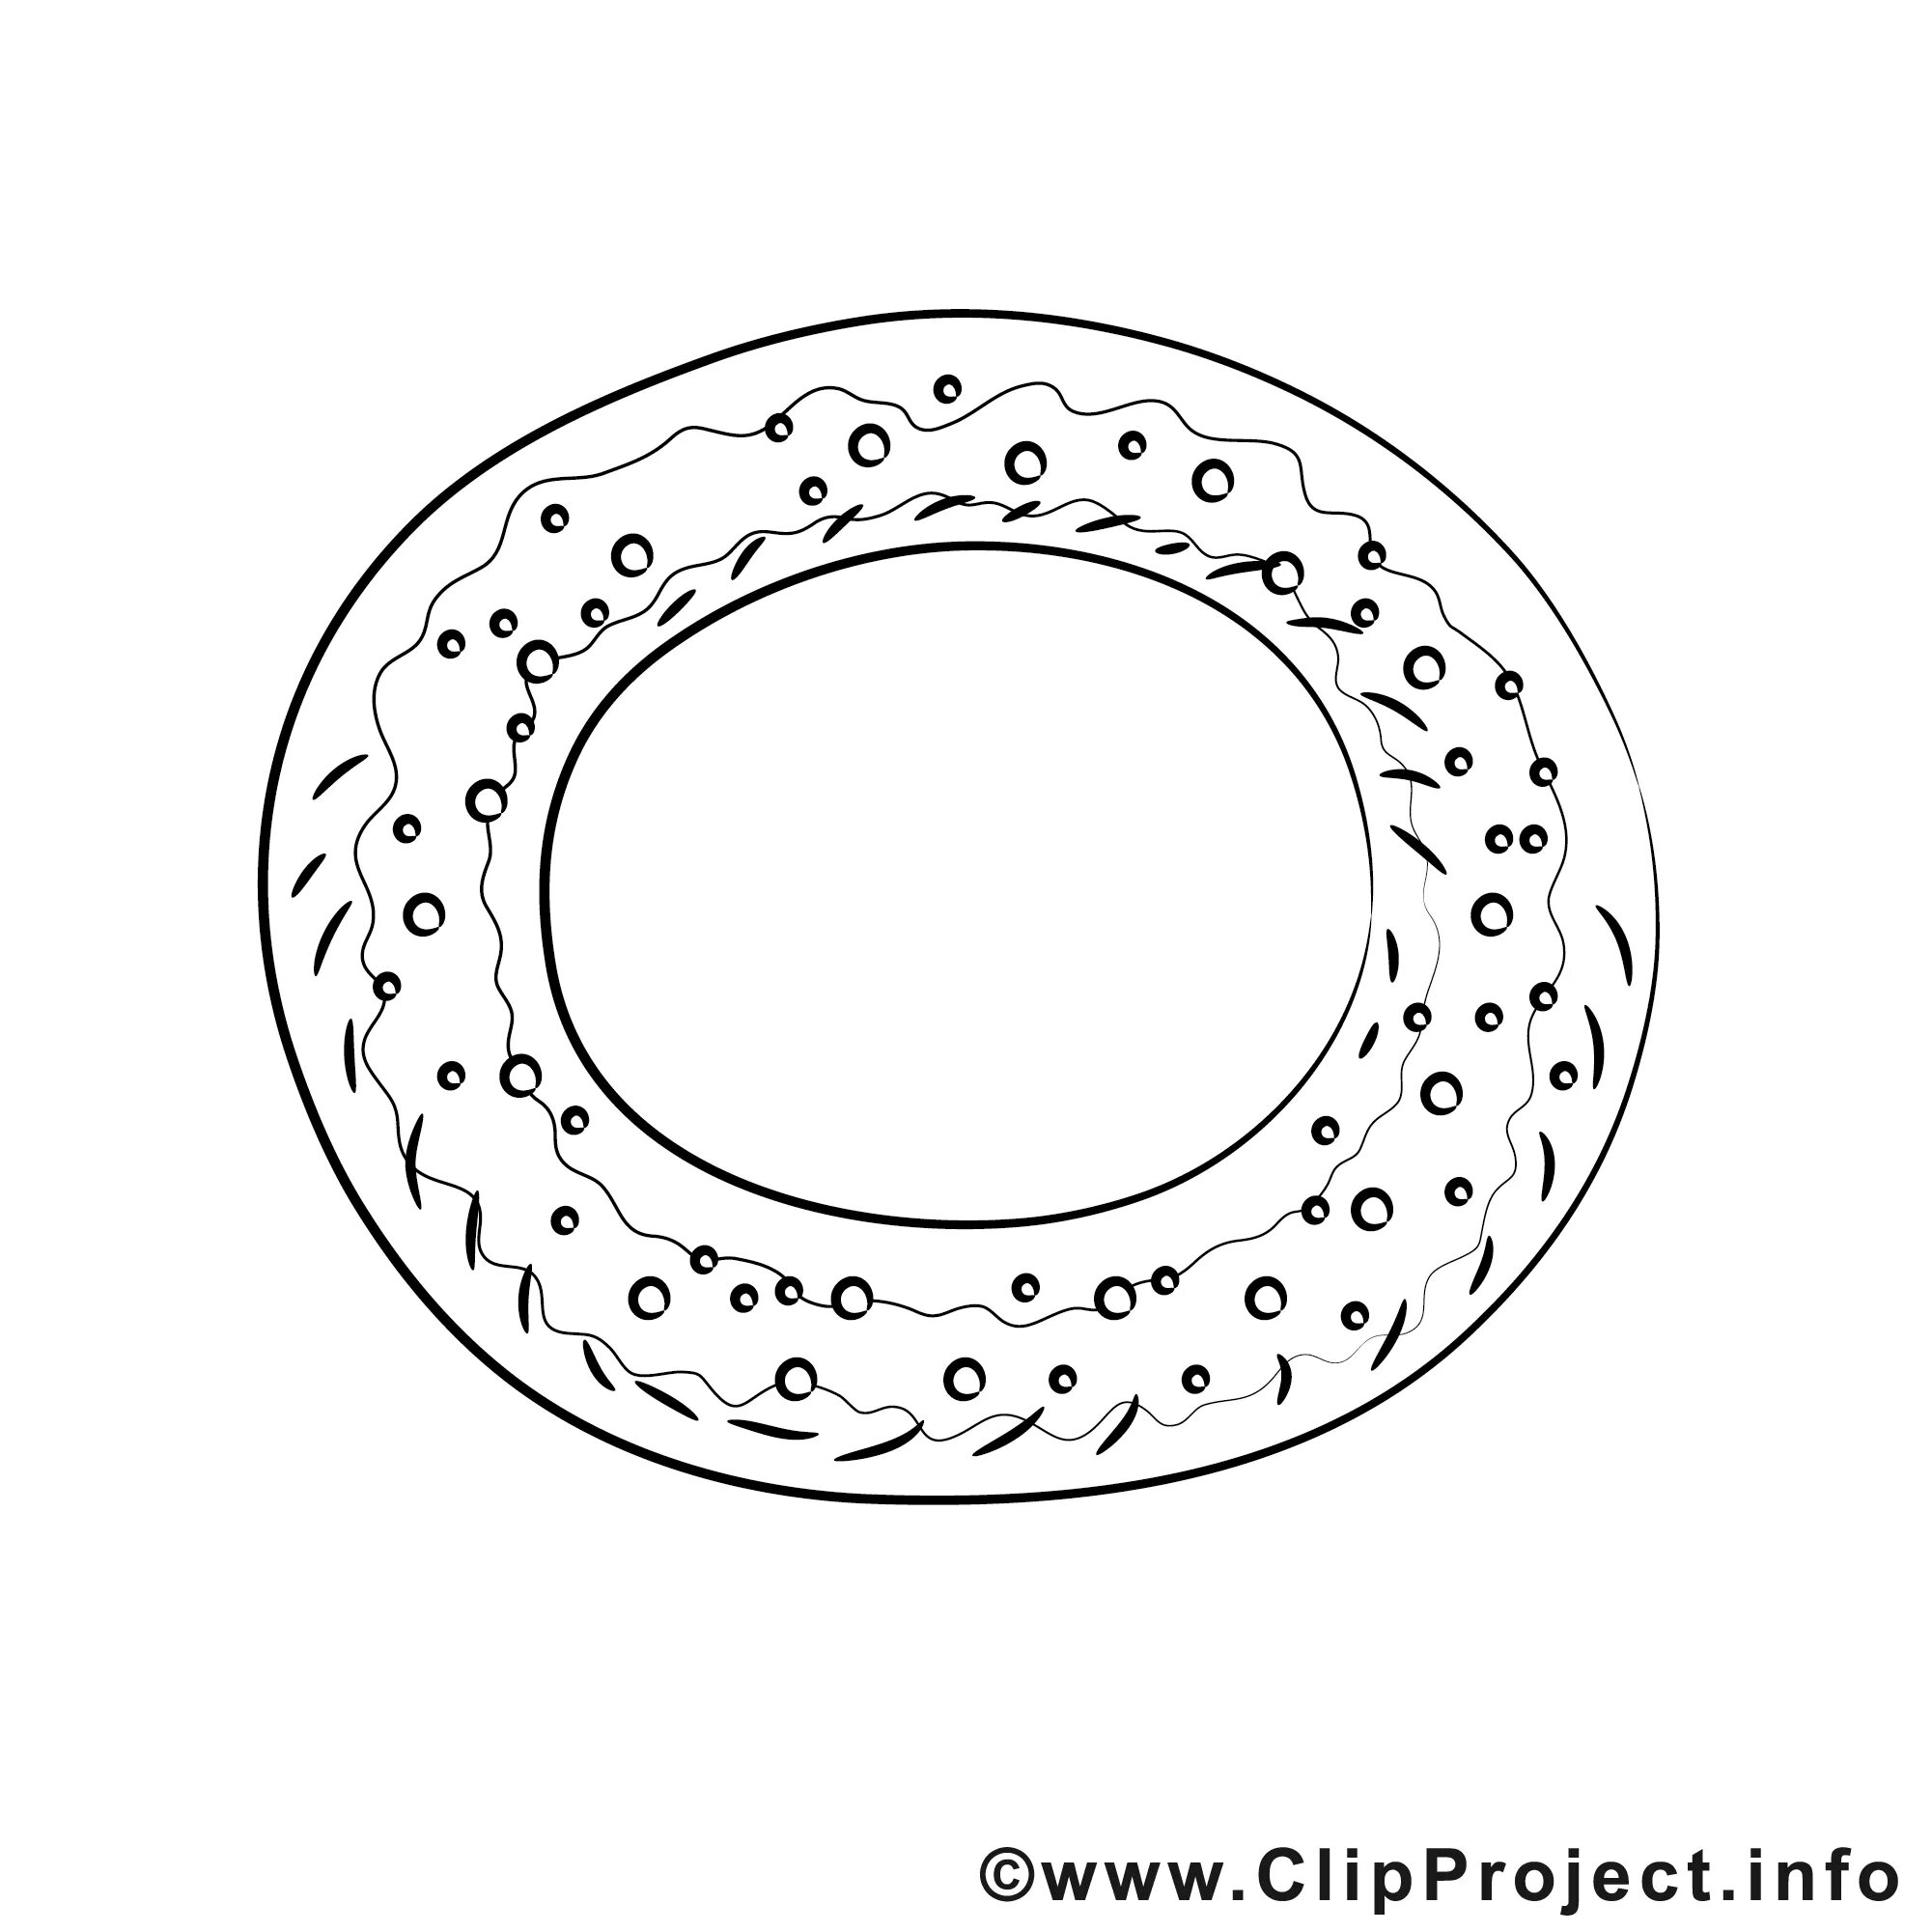 Coloring page elegant bagel with donuts